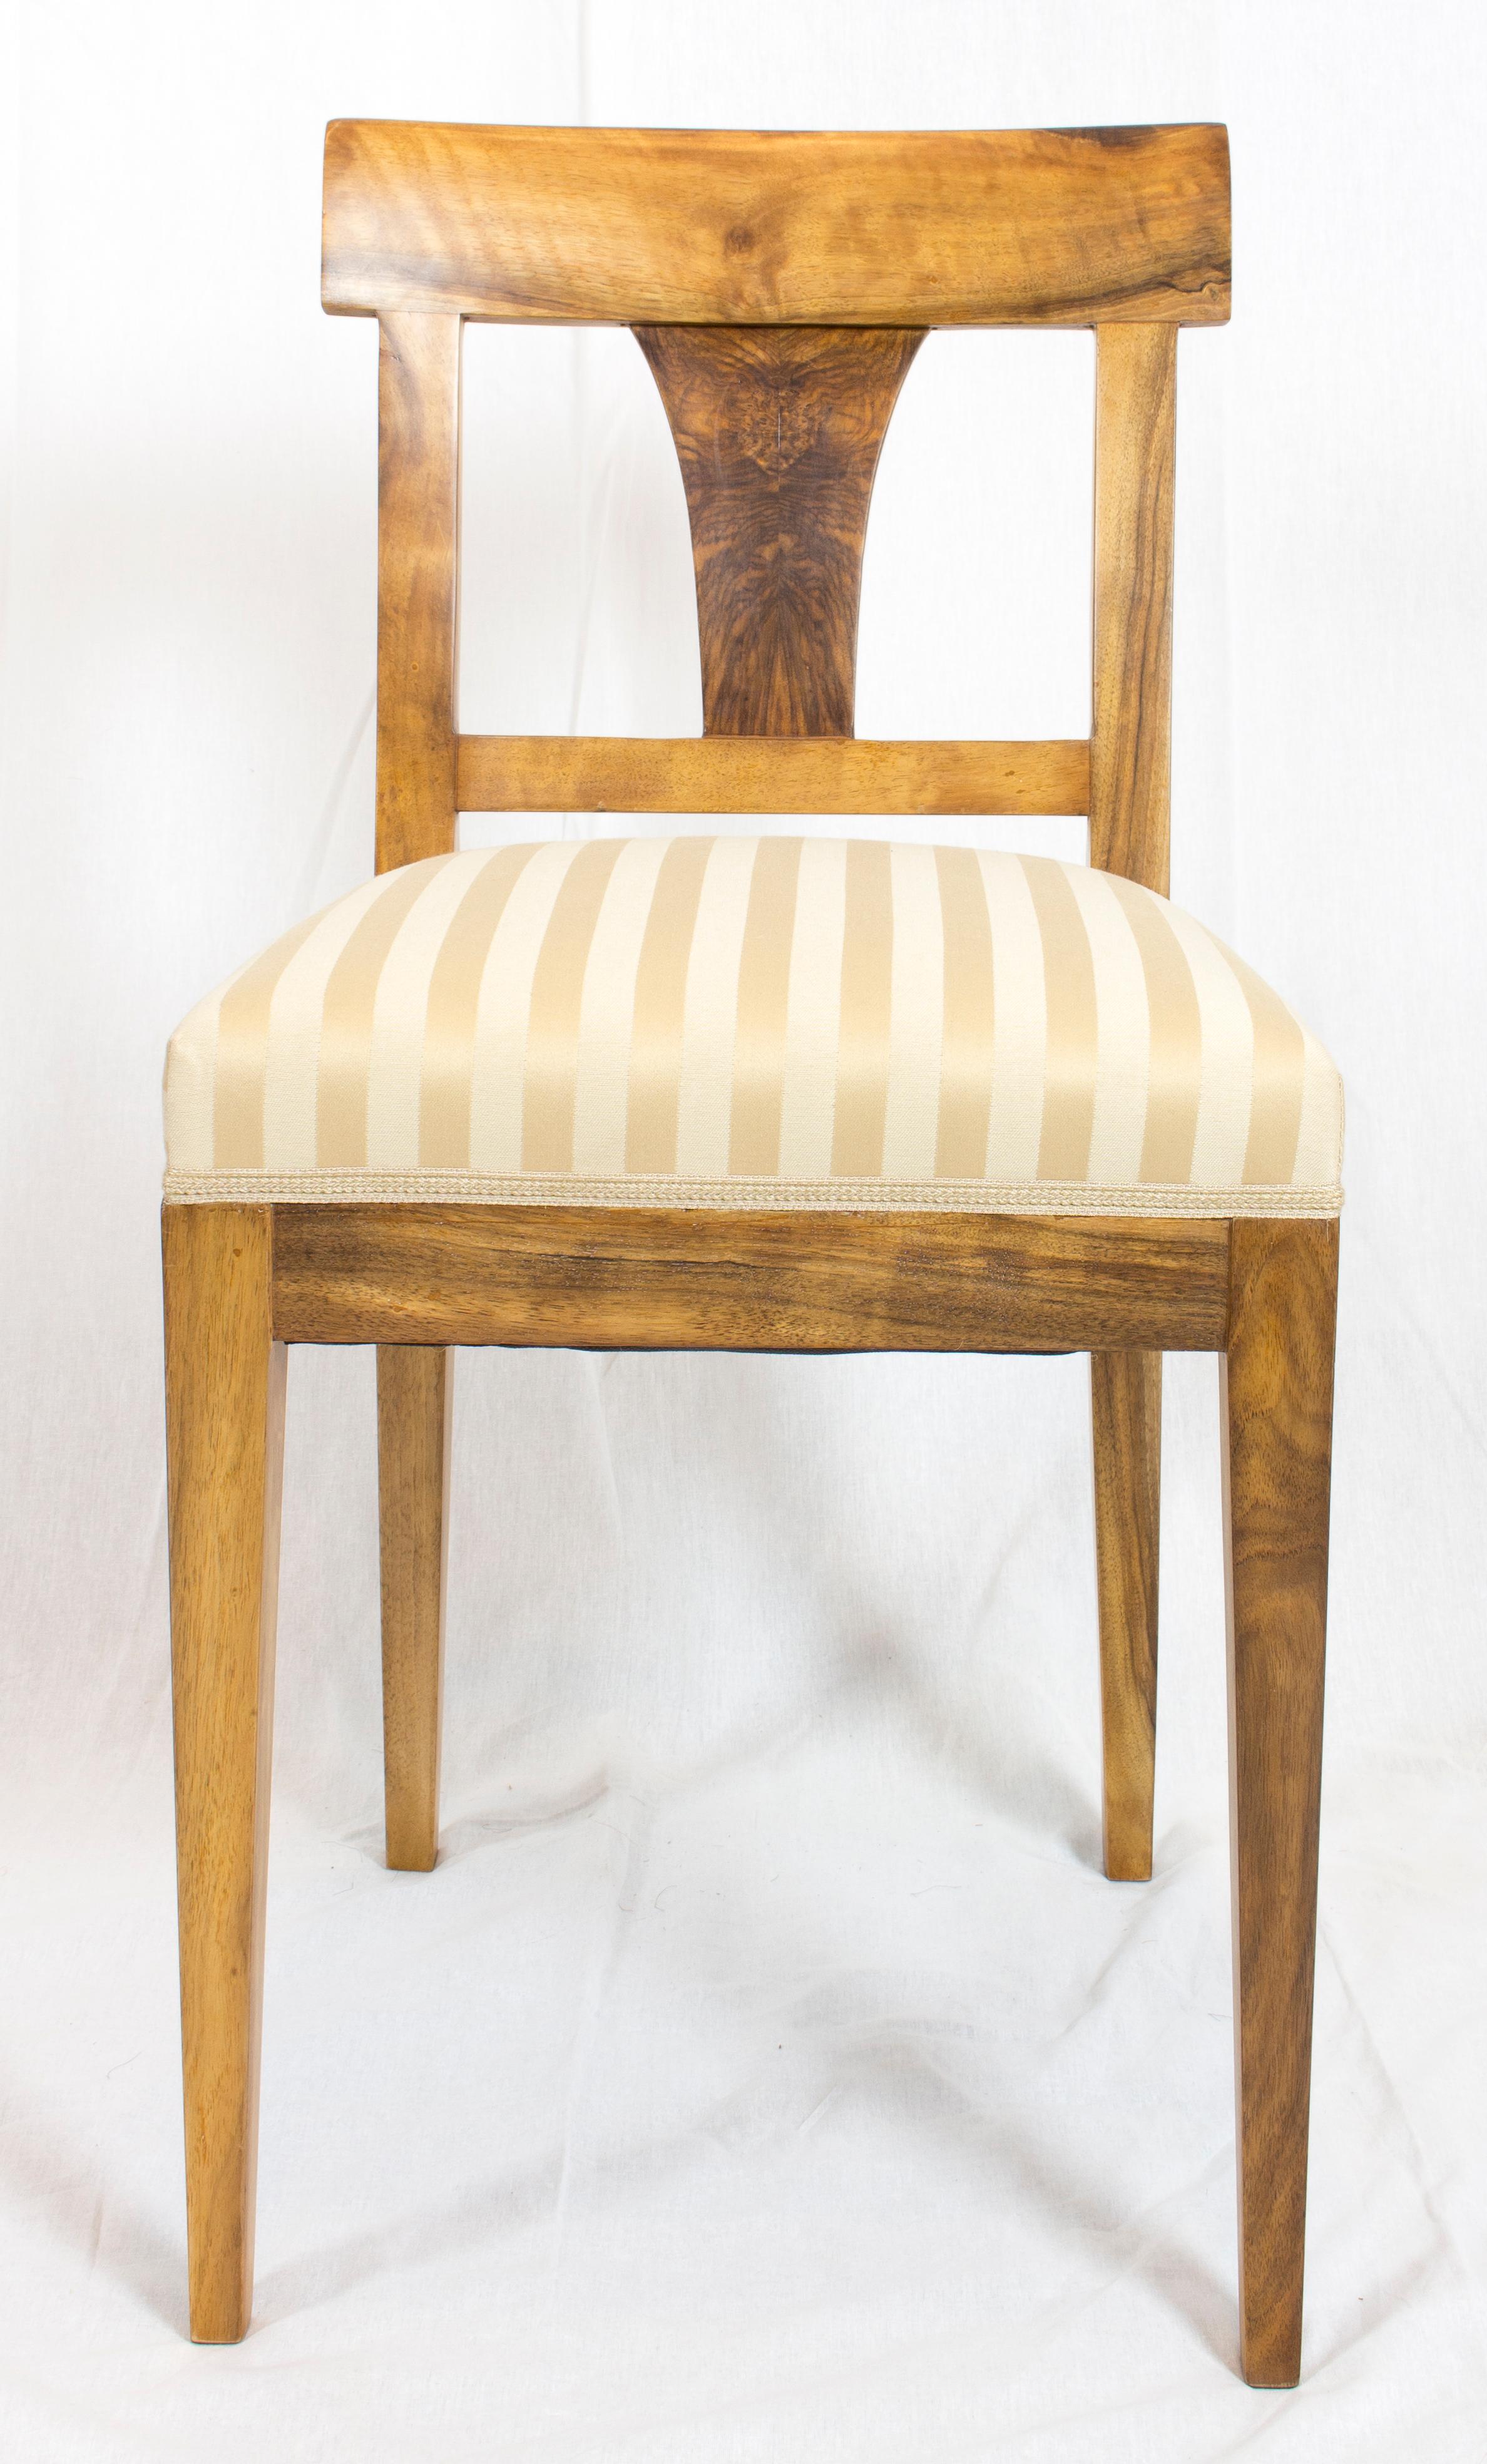 A chair from the time of the Biedermeier, circa 1830. The chair is made of solid walnut. The chair is newly upholstered.
In very good restored condition. The surface is semi-glossy and very smooth.